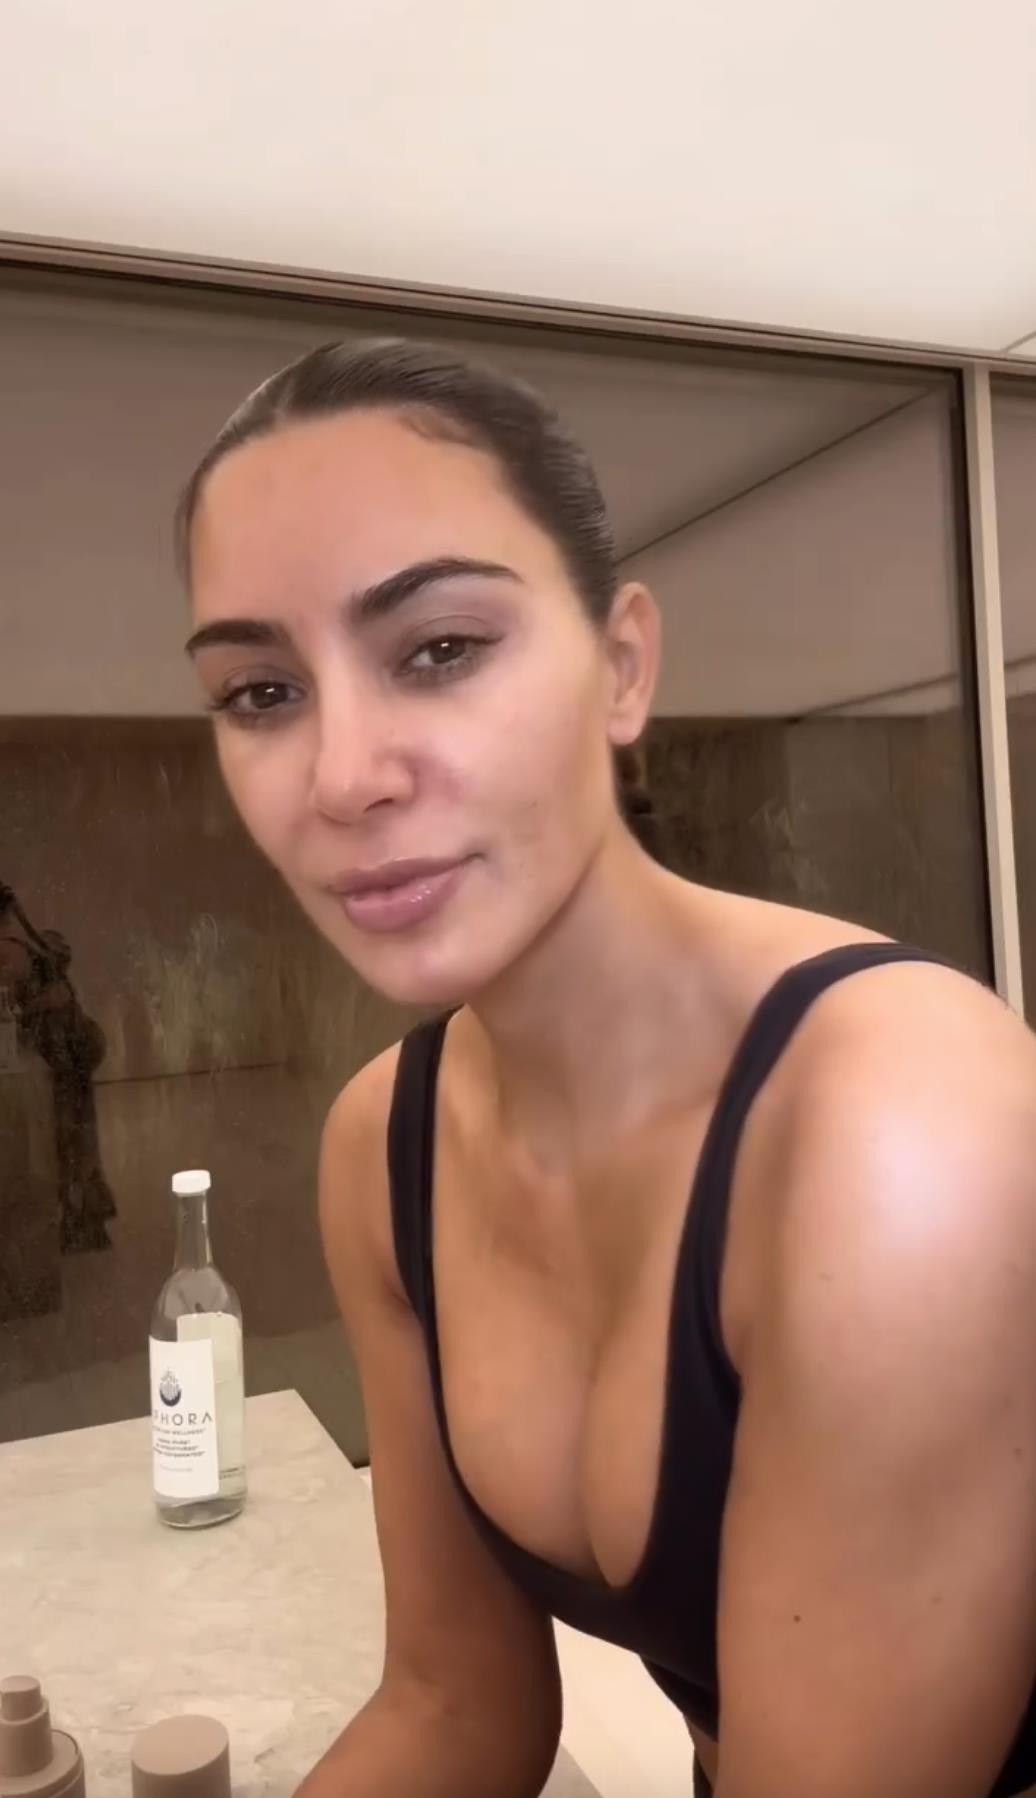 Kim Kardashian flaunts her tiny waist as she ditches her top in new video taken inside huge bathroom of her $60M mansion